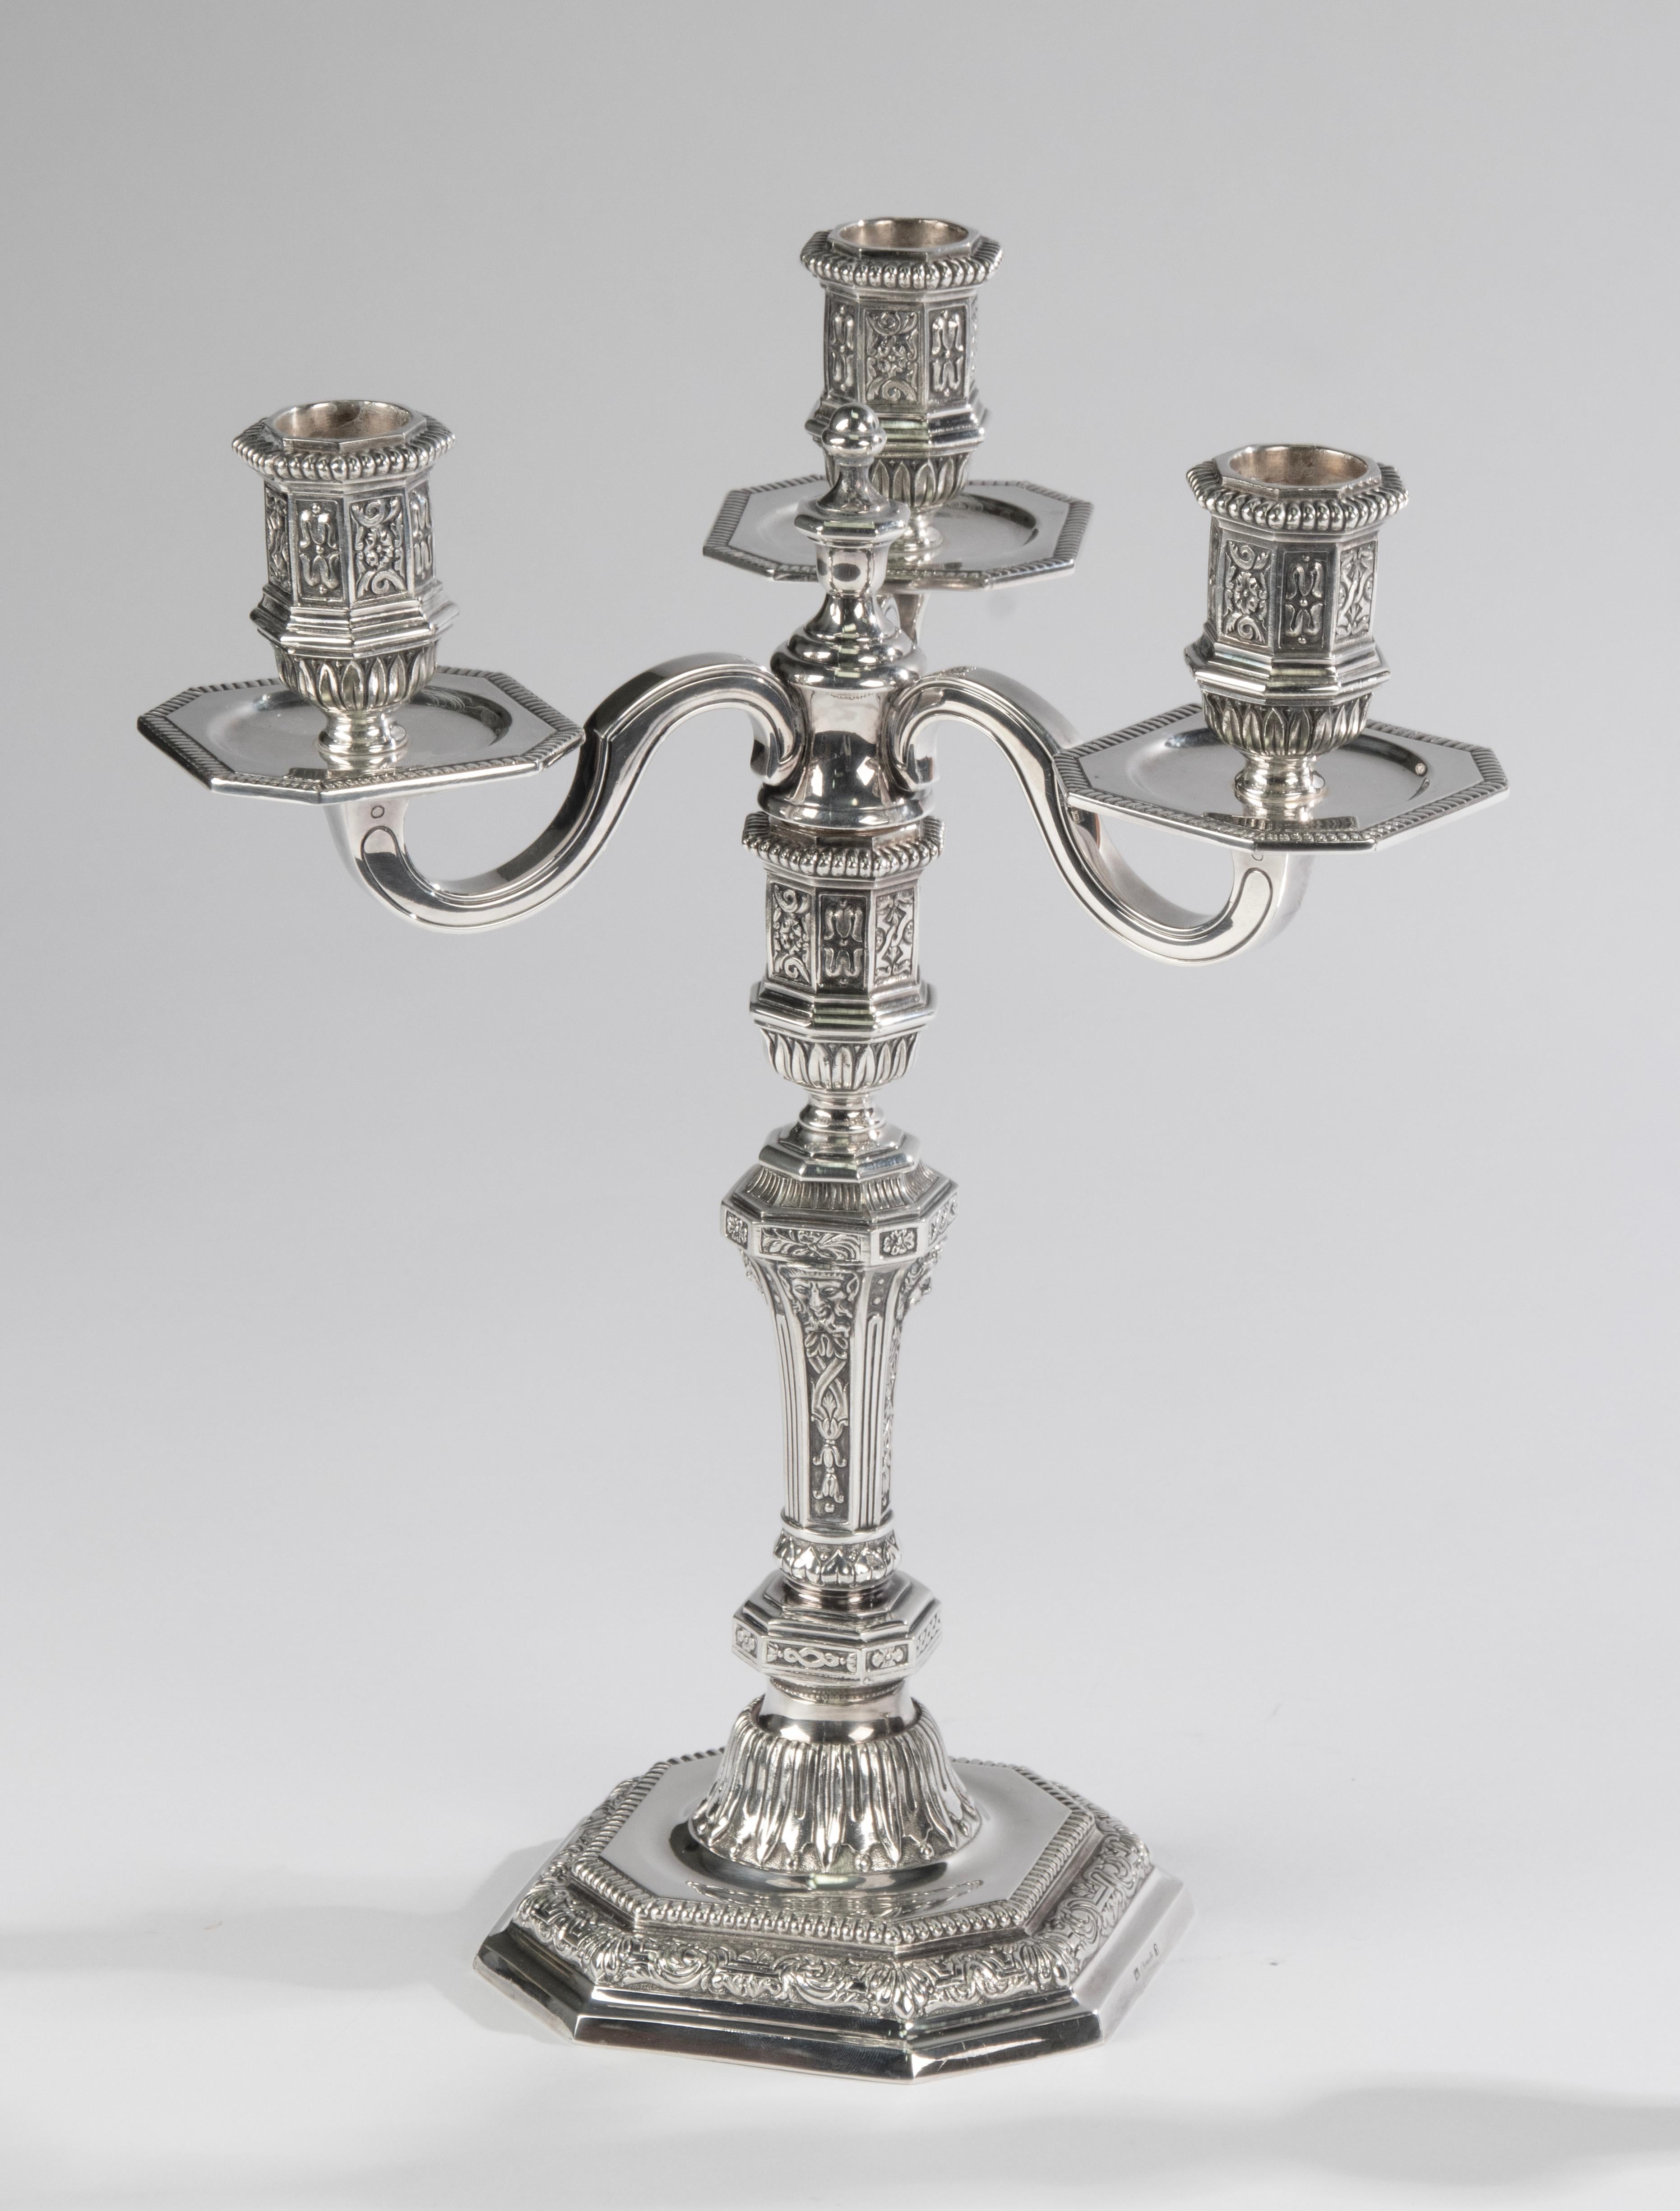 A great set of 2 silver plated candelabras, made by the French brand Christofle. 
The candelabras are designed by Louis Dupérier in renaissance style. 
Very refined, with many detailed decorations. 
Each candle has place for three candles. The top